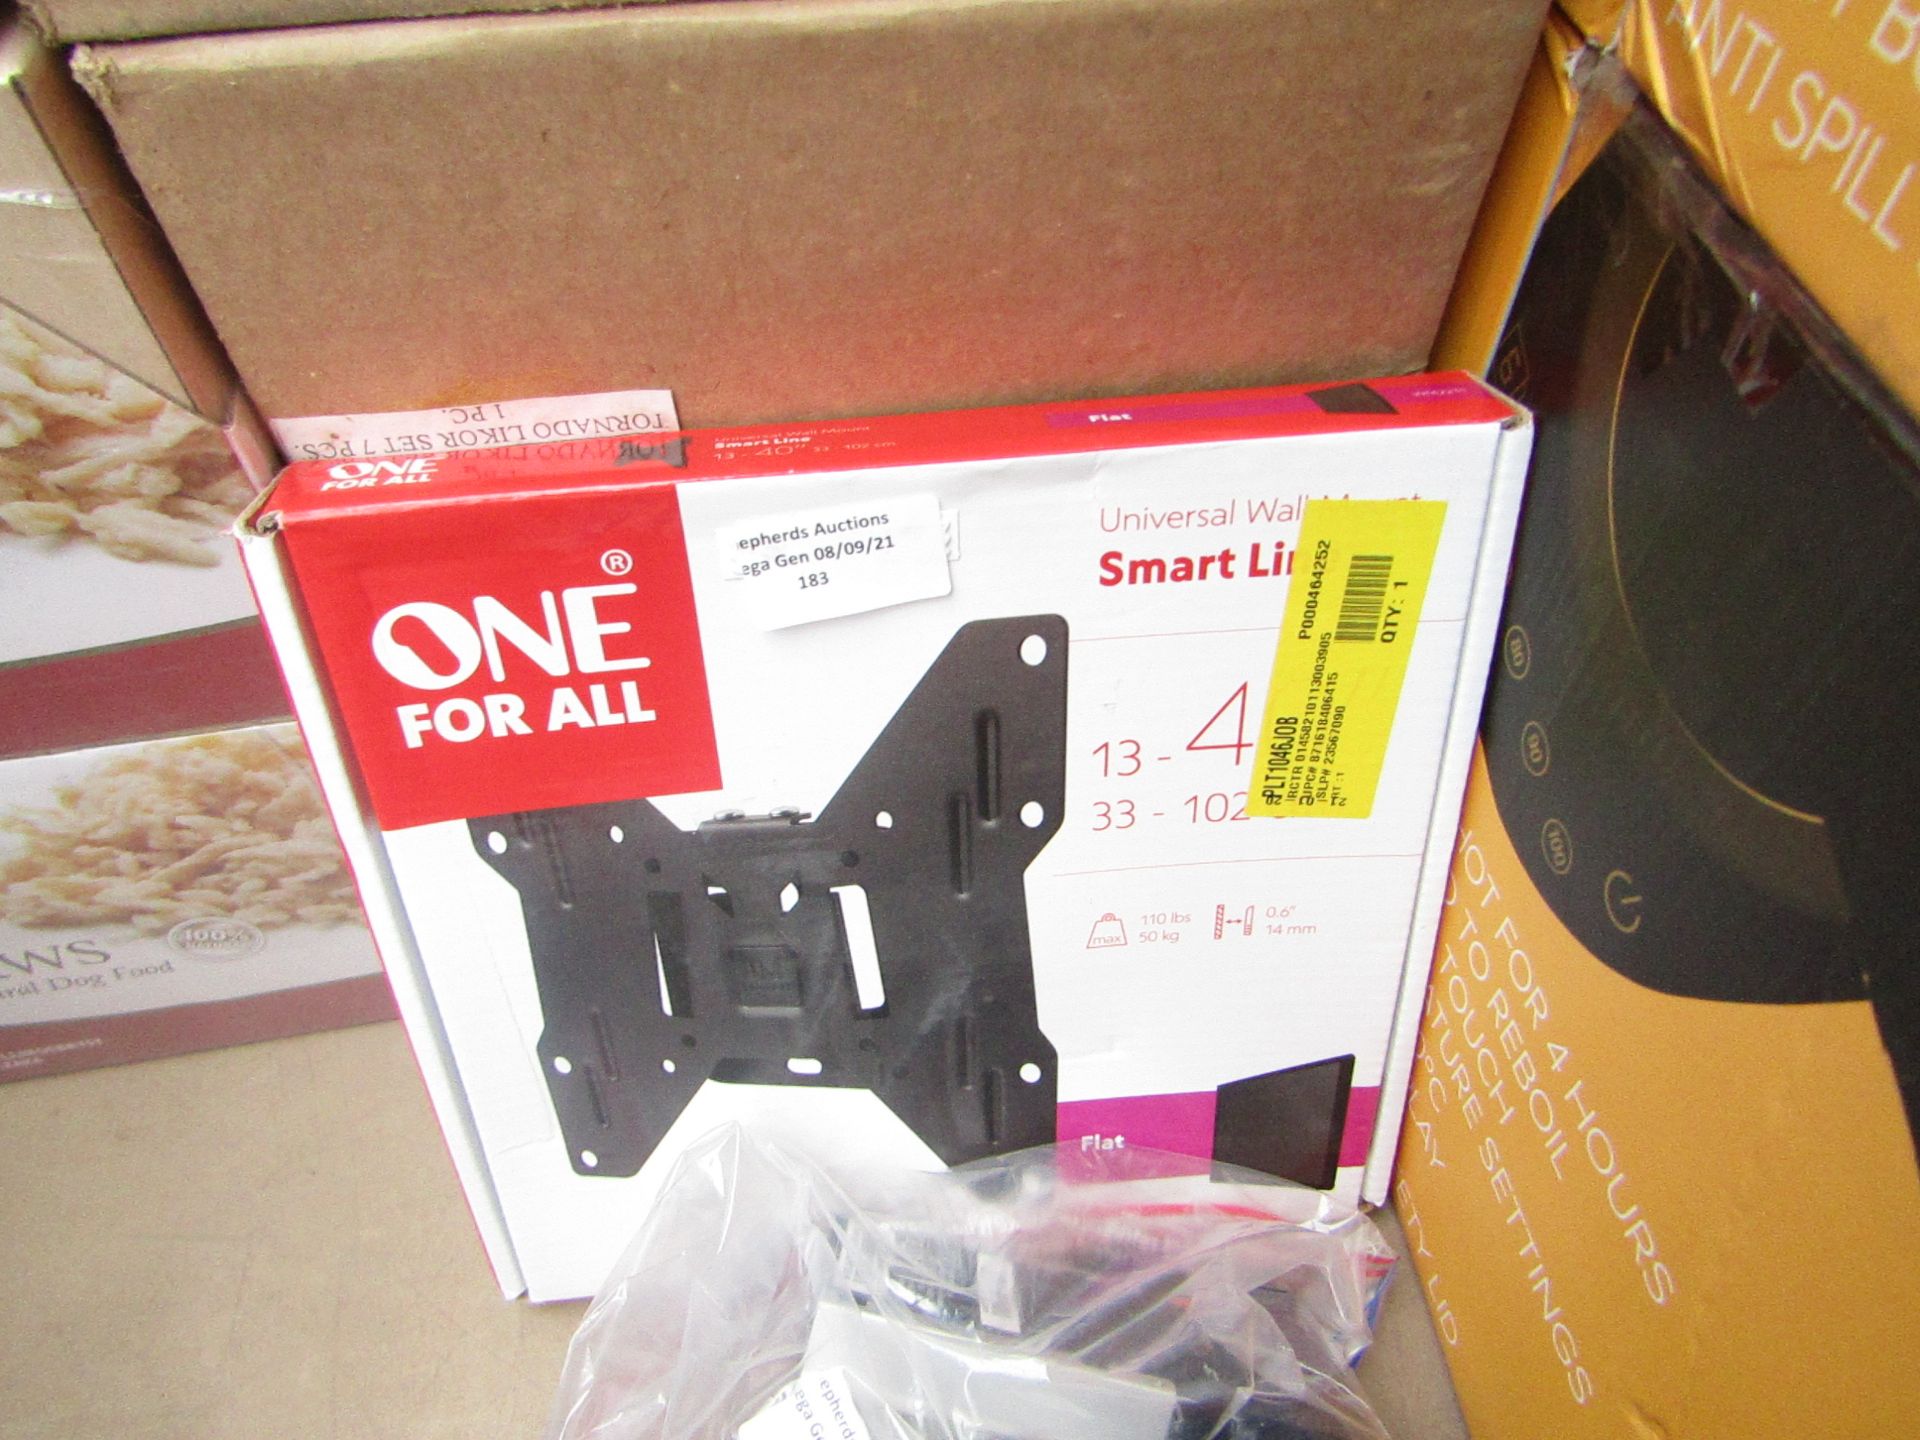 1x One for all flat universal wall mount - unchecked & boxed.